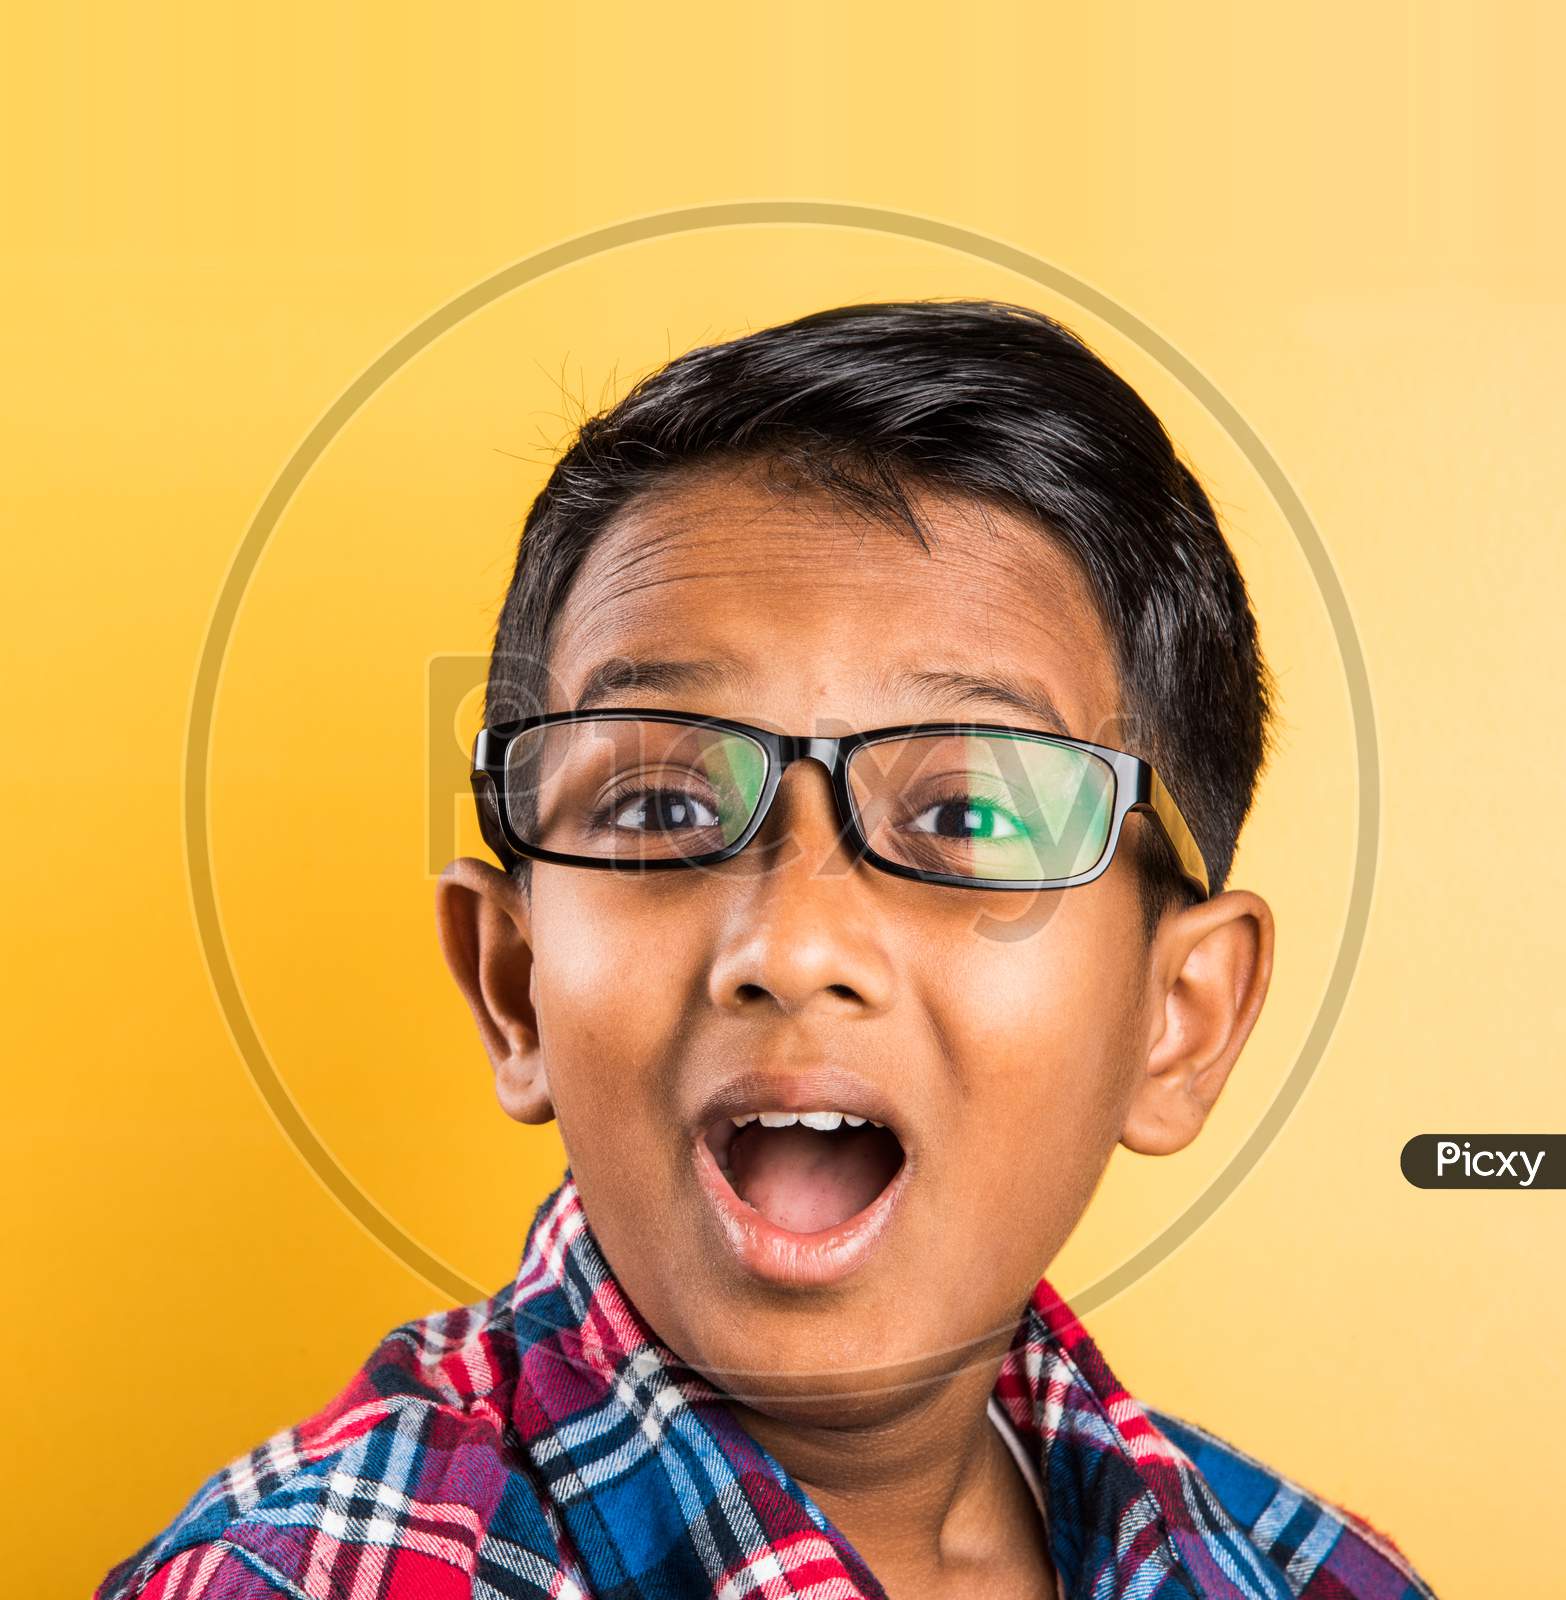 Small boy wears clear eye glasses or spectacles